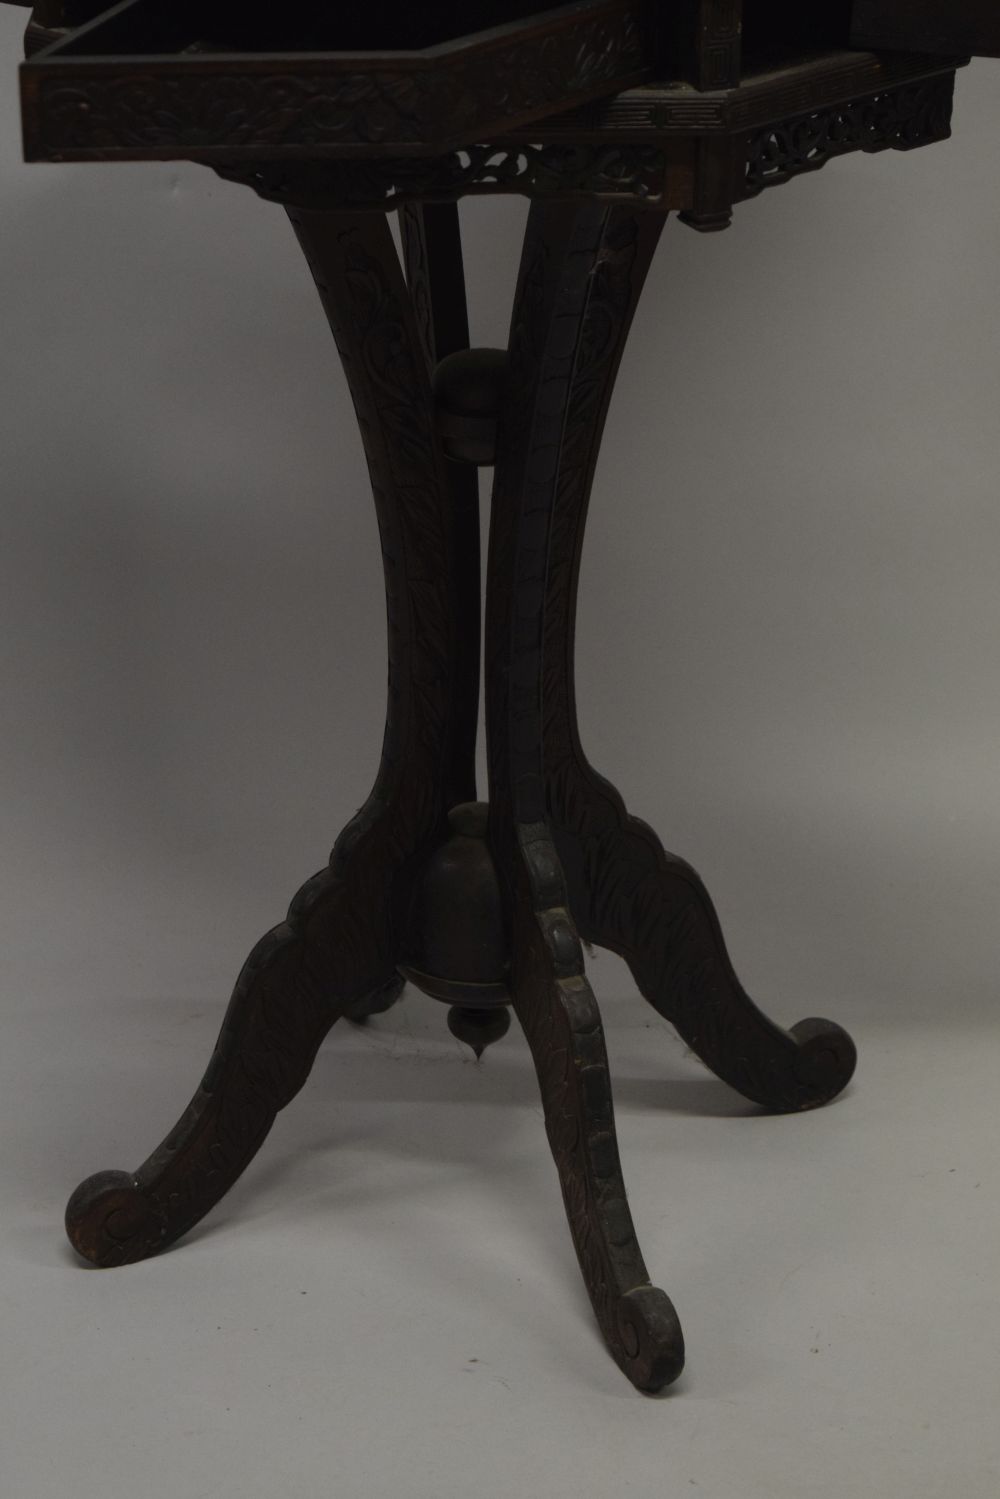 AN UNUSUAL CHINESE OCTAGONAL CARVED HARDWOOD PEDESTAL TABLE, the top inset with a cloissonne panel - Image 6 of 7